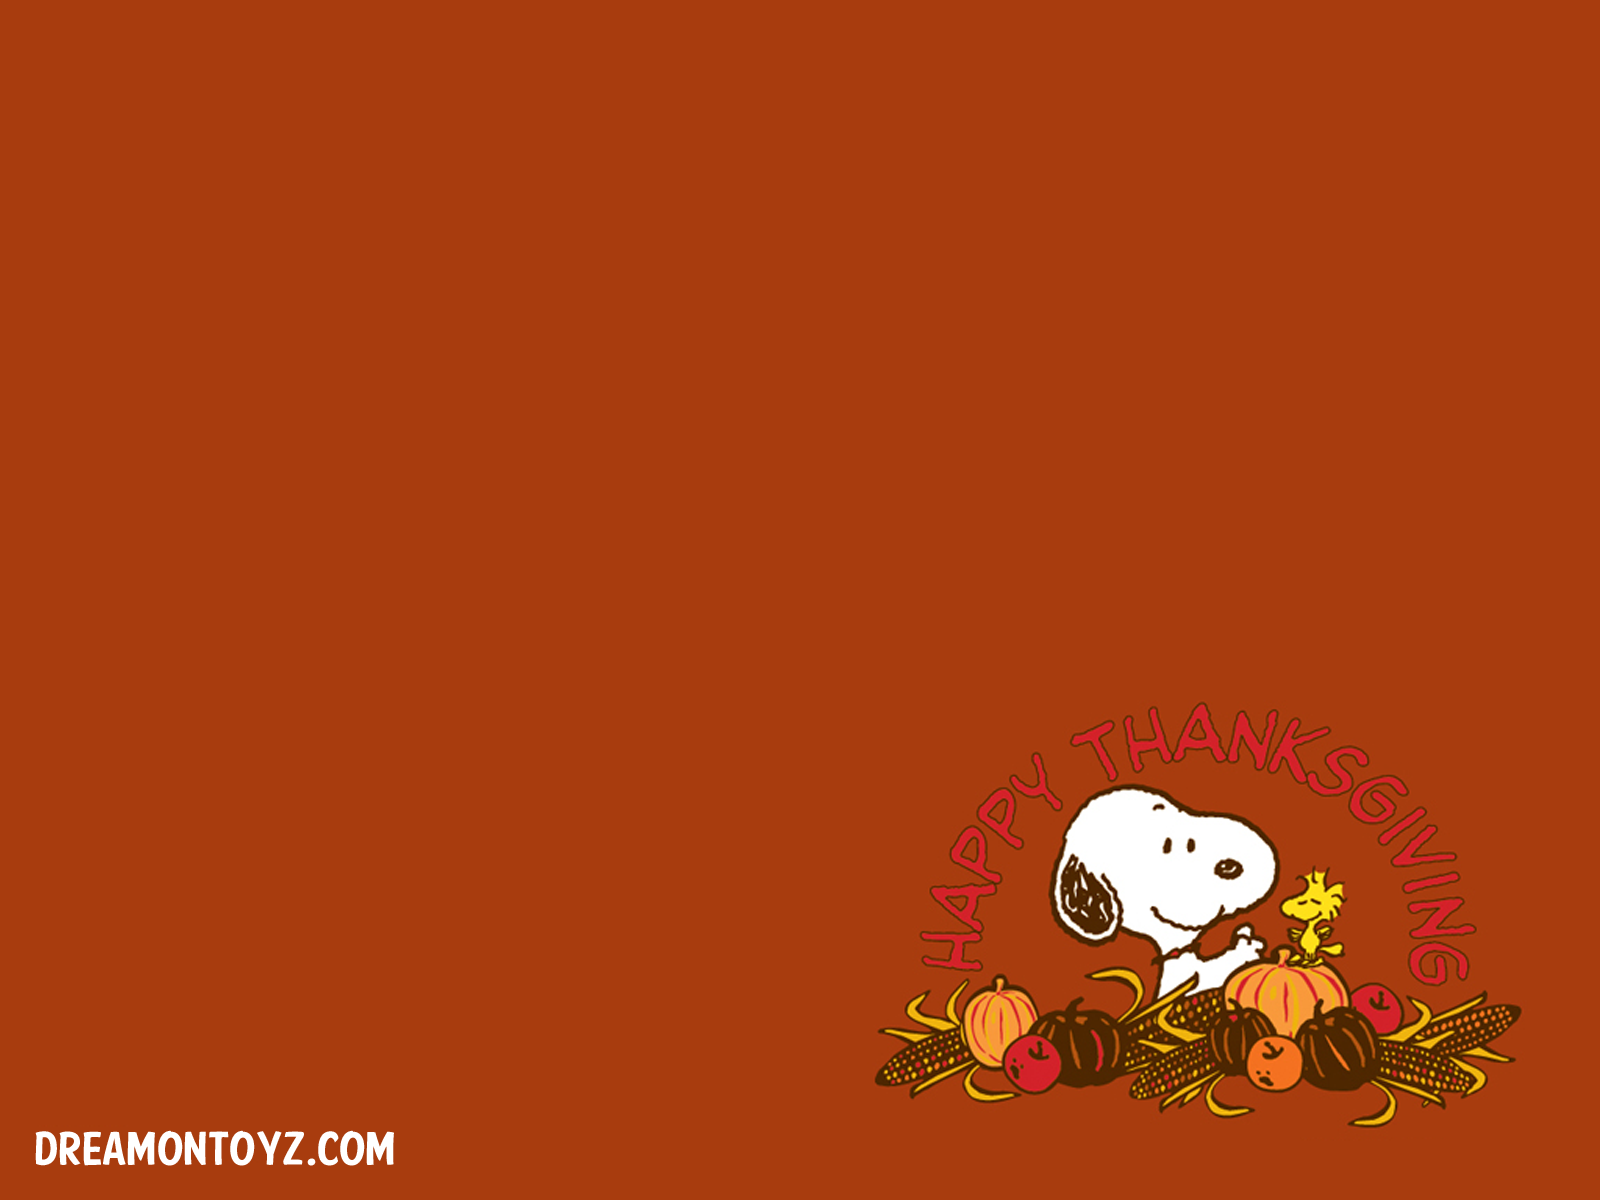 ... / Pics / Gifs / Photographs: Peanuts Snoopy Thanksgiving wallpapers